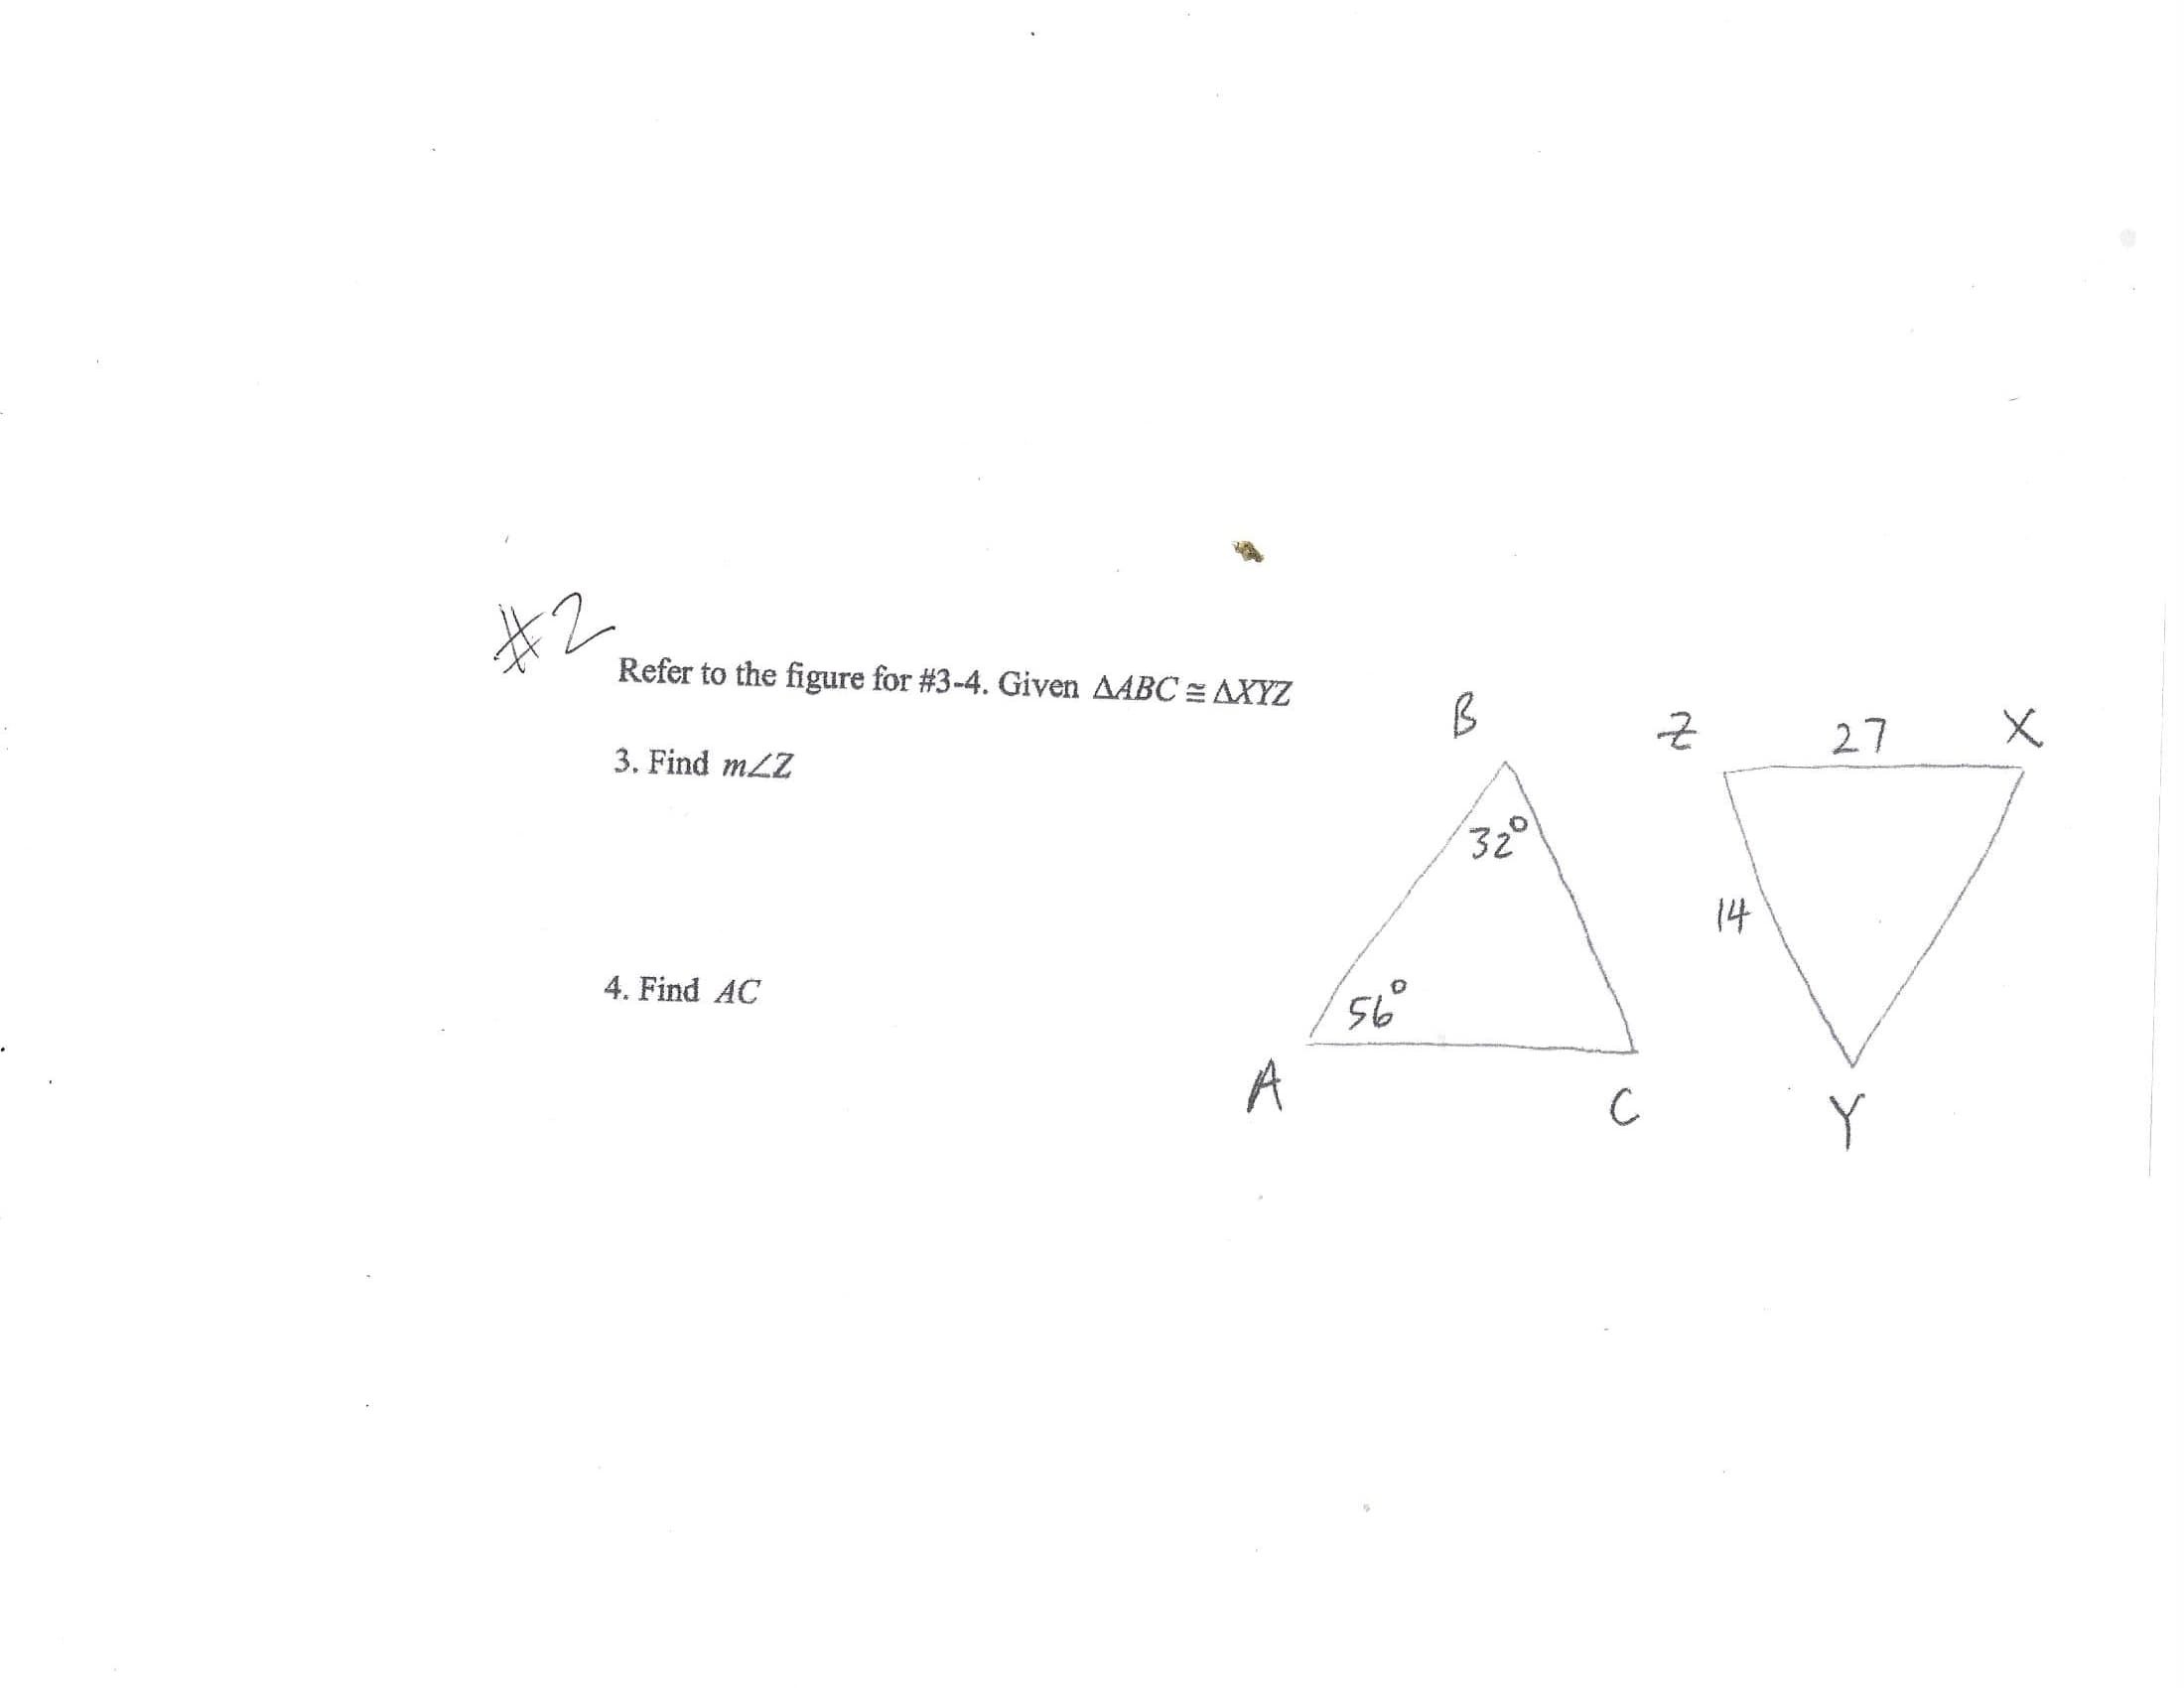 Refer to the figure for #3-4. Given AABC = AXYZ
3. Find mLZ
27
32°
14
-. Find AC
56
A
C
Y
